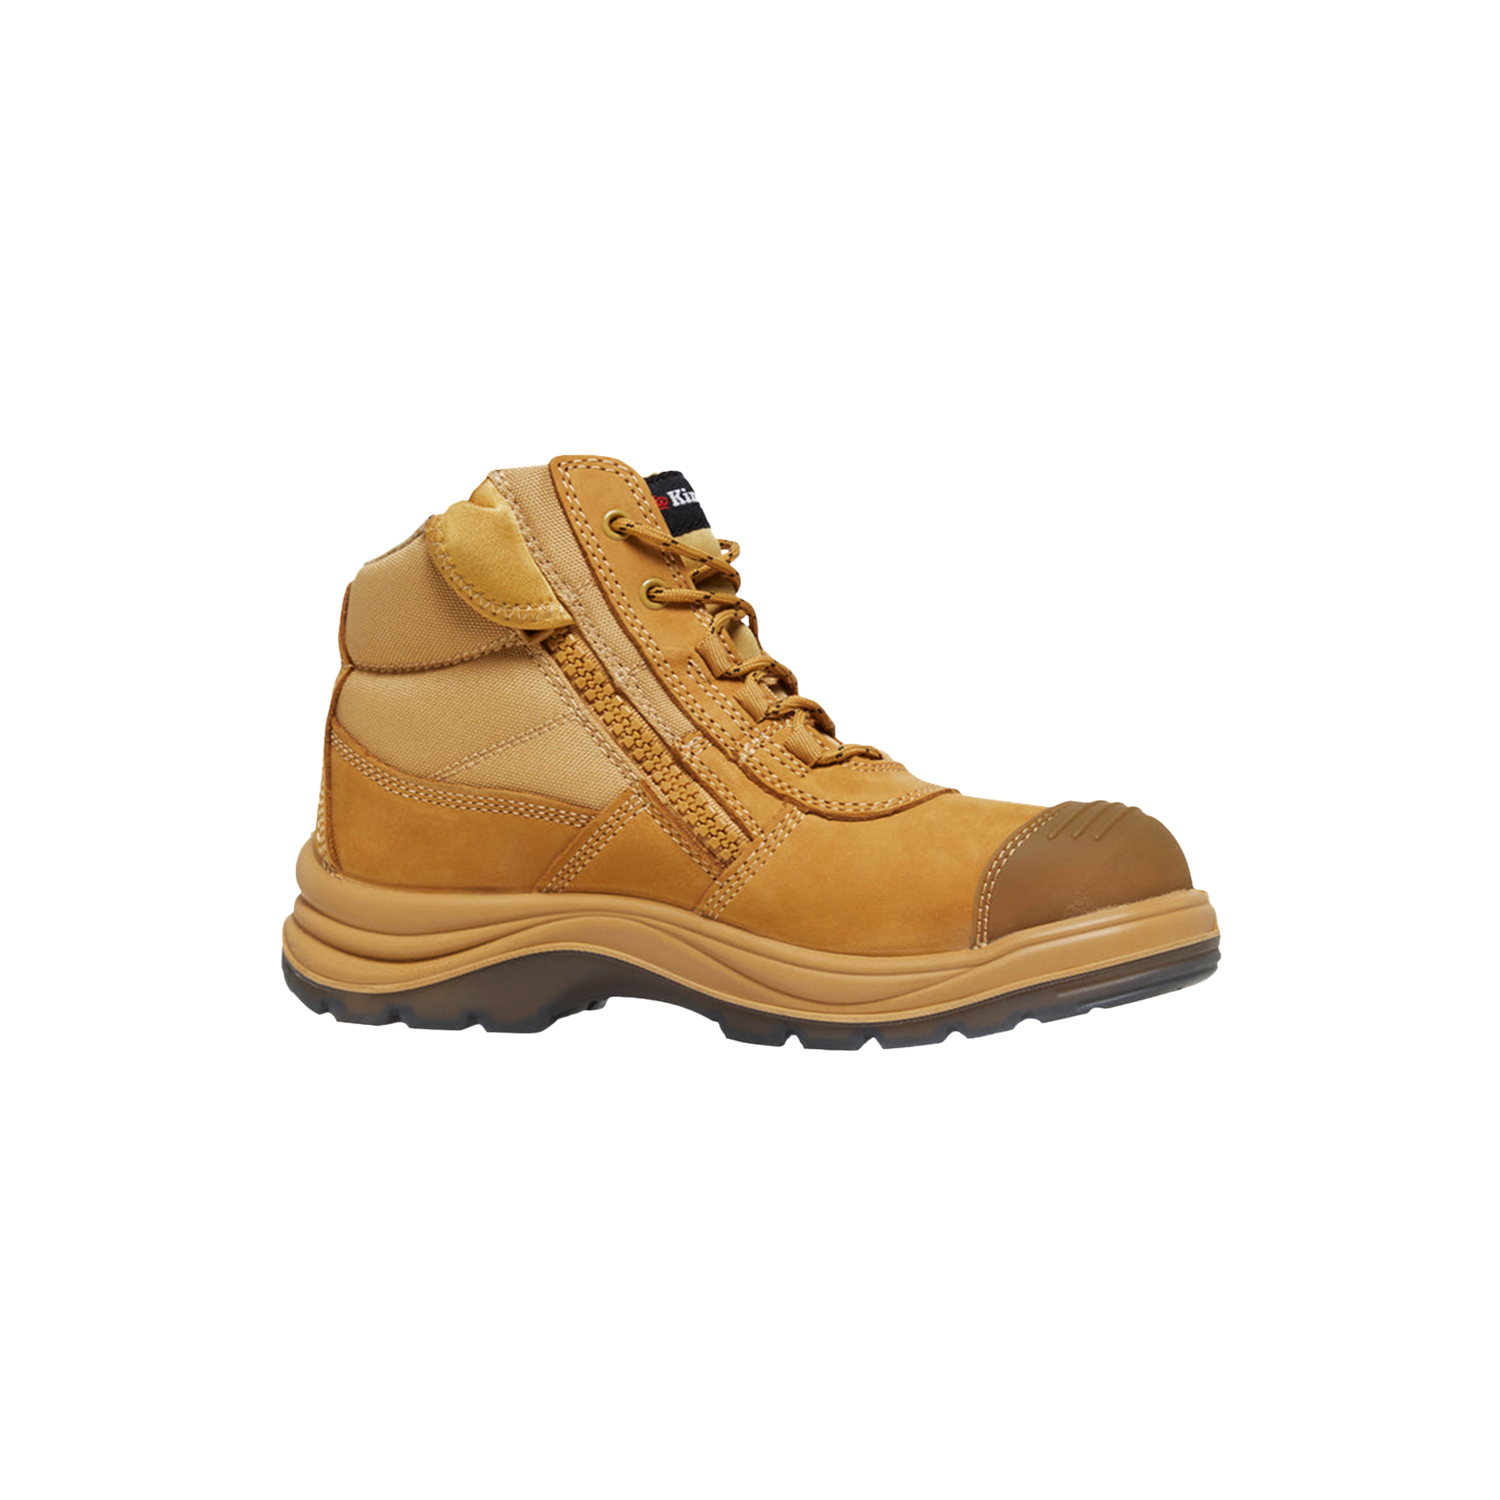 KingGee Men's Tradie ComfortMax Zip Sided Safety Boots - Wheat ...